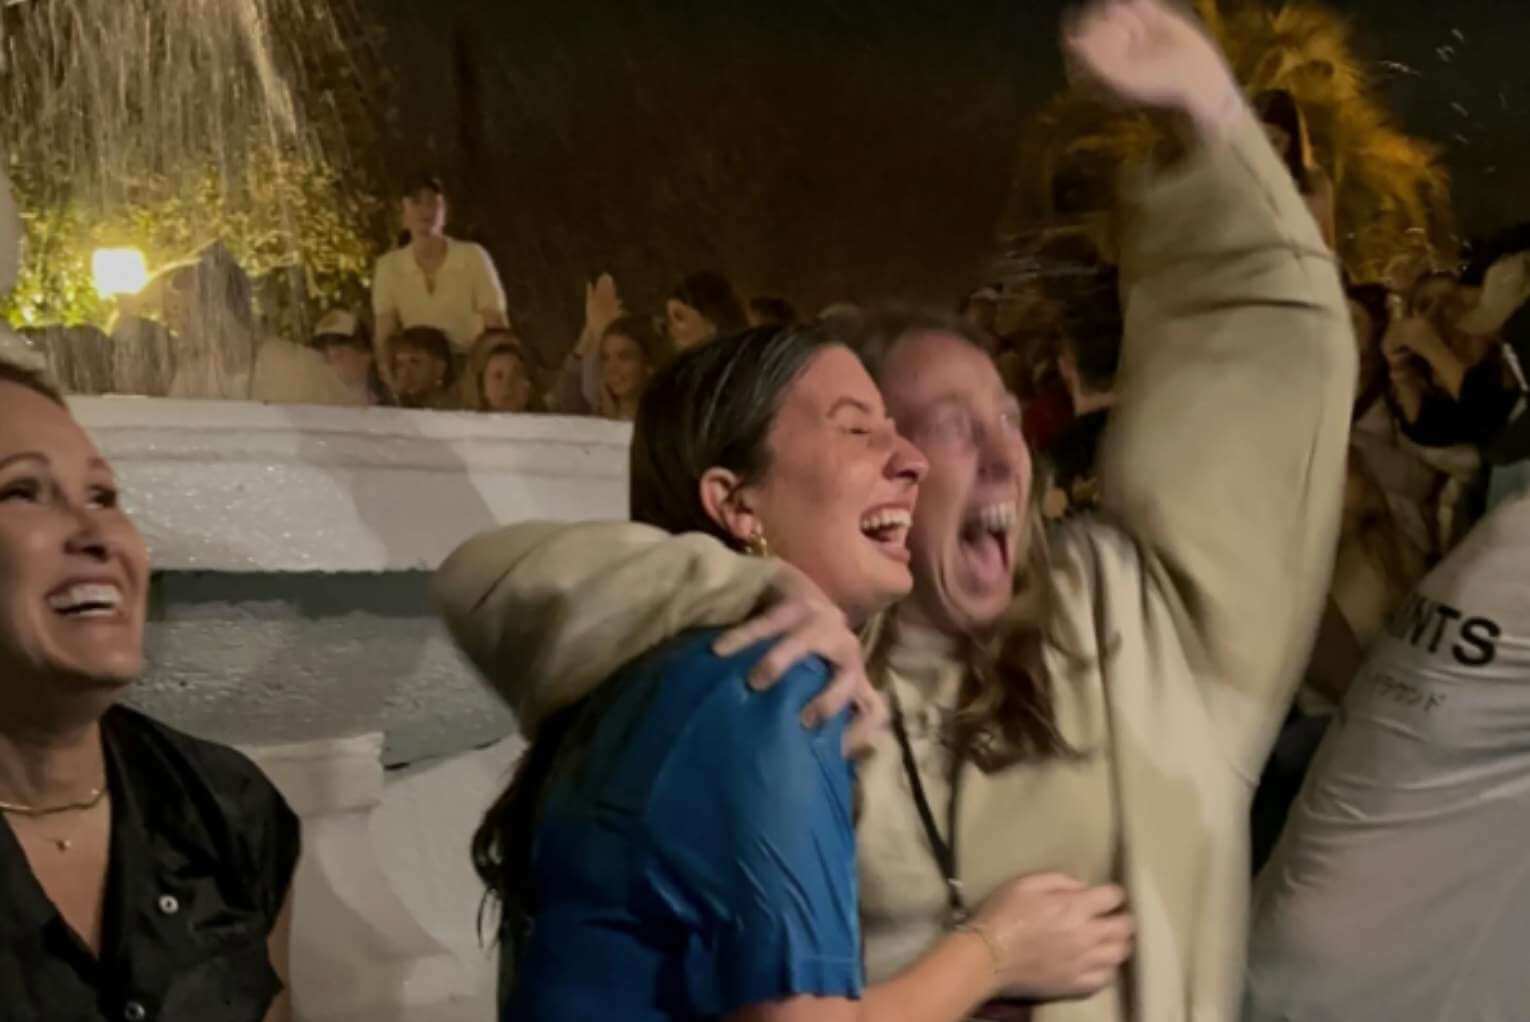 Morning Rundown: Hundreds of Young Adults Embrace Christ in Spontaneous Baptisms